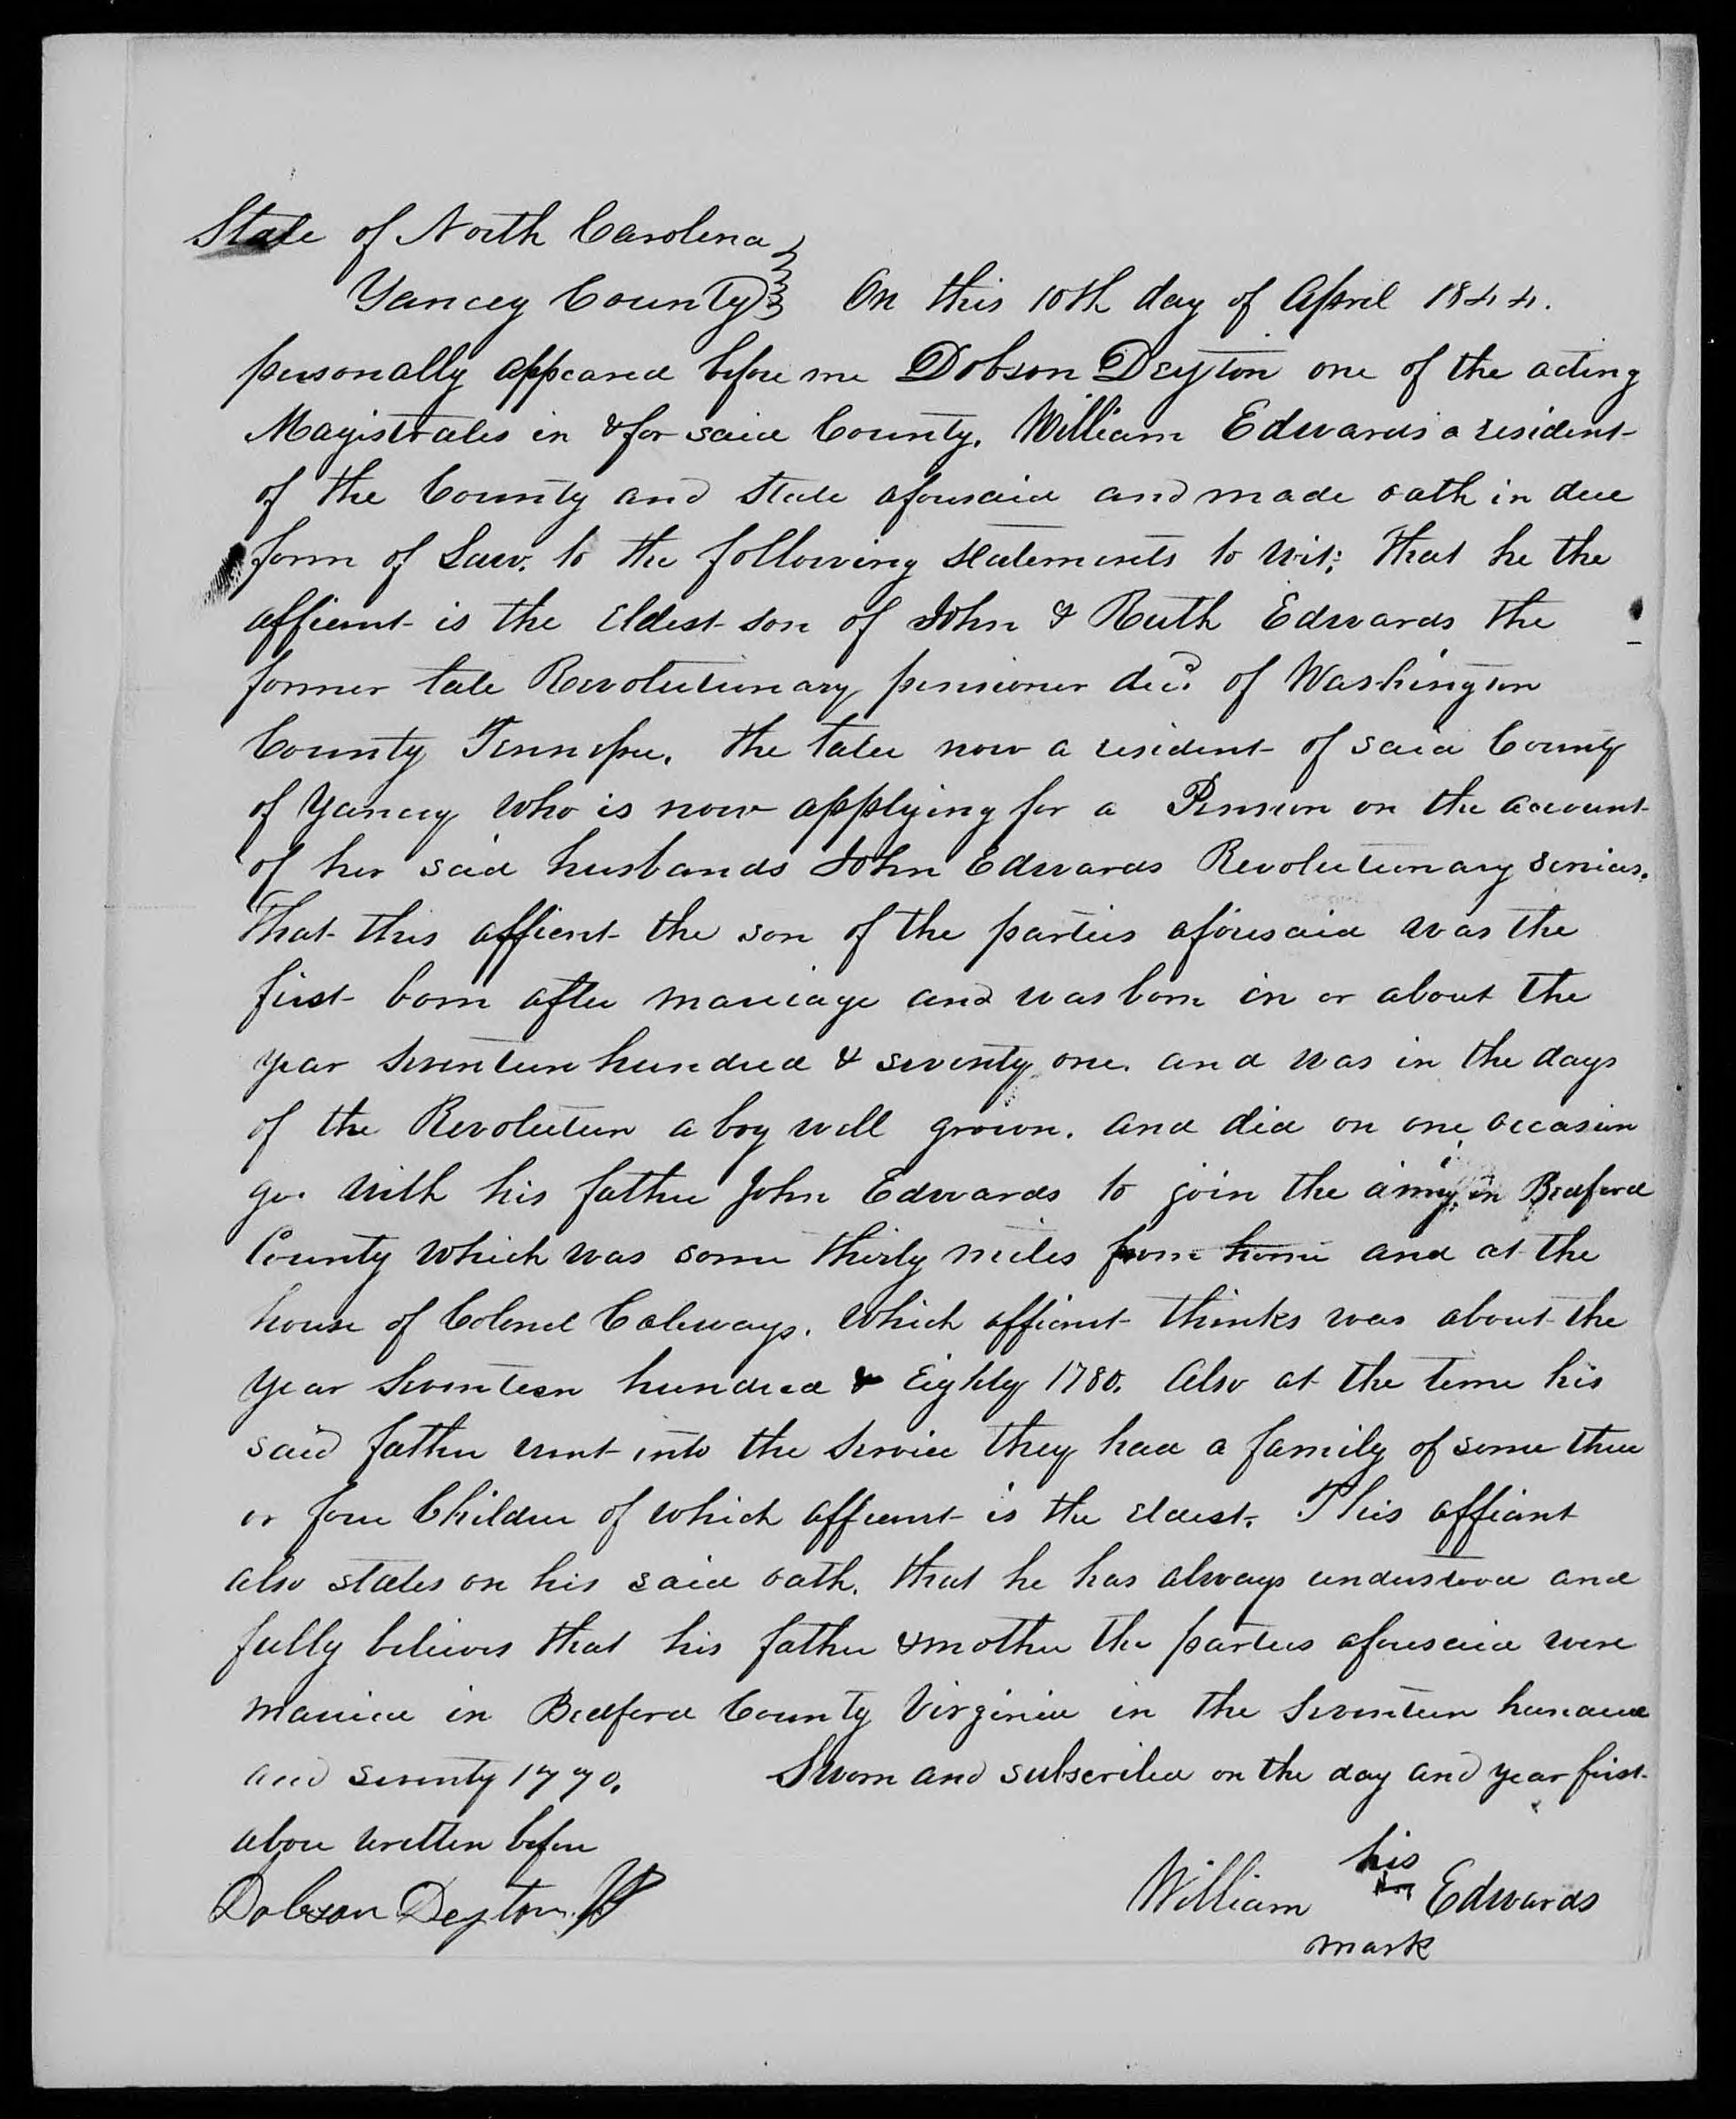 Affidavit of William Edwards Jr. in support of a Pension Claim for Ruth Edwards, 10 April 1844, page 1